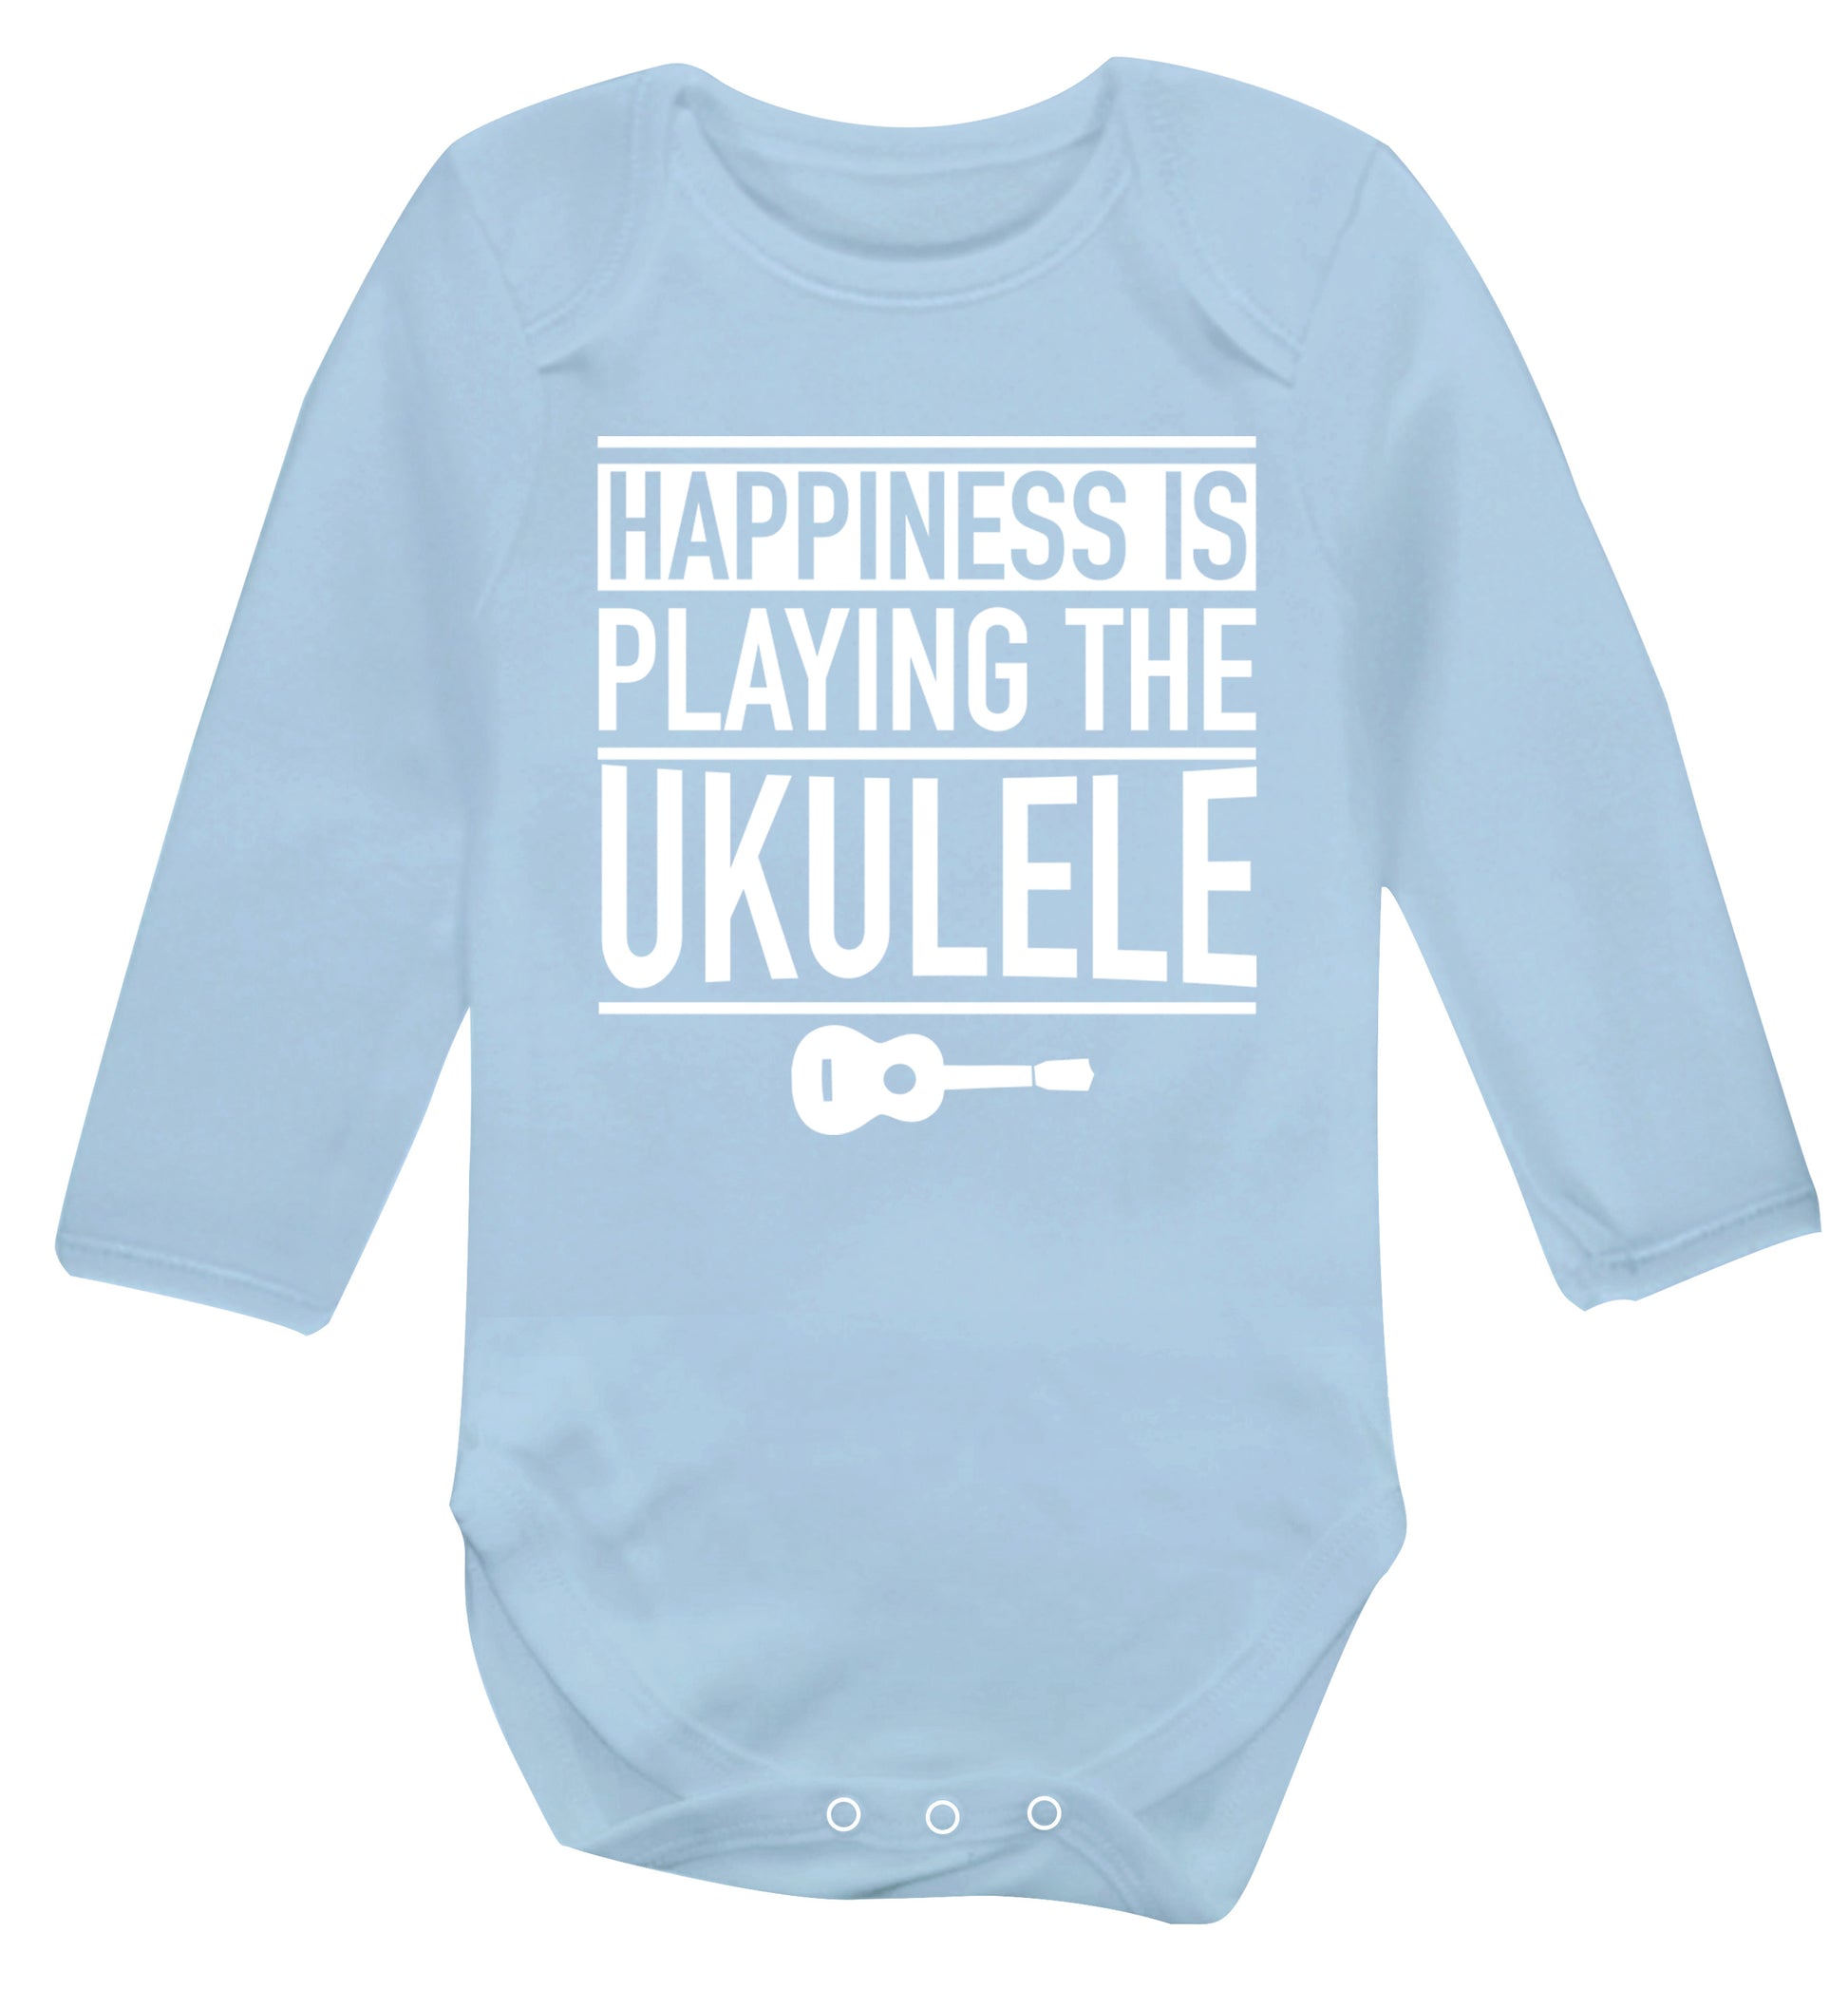 Happines is playing the ukulele Baby Vest long sleeved pale blue 6-12 months